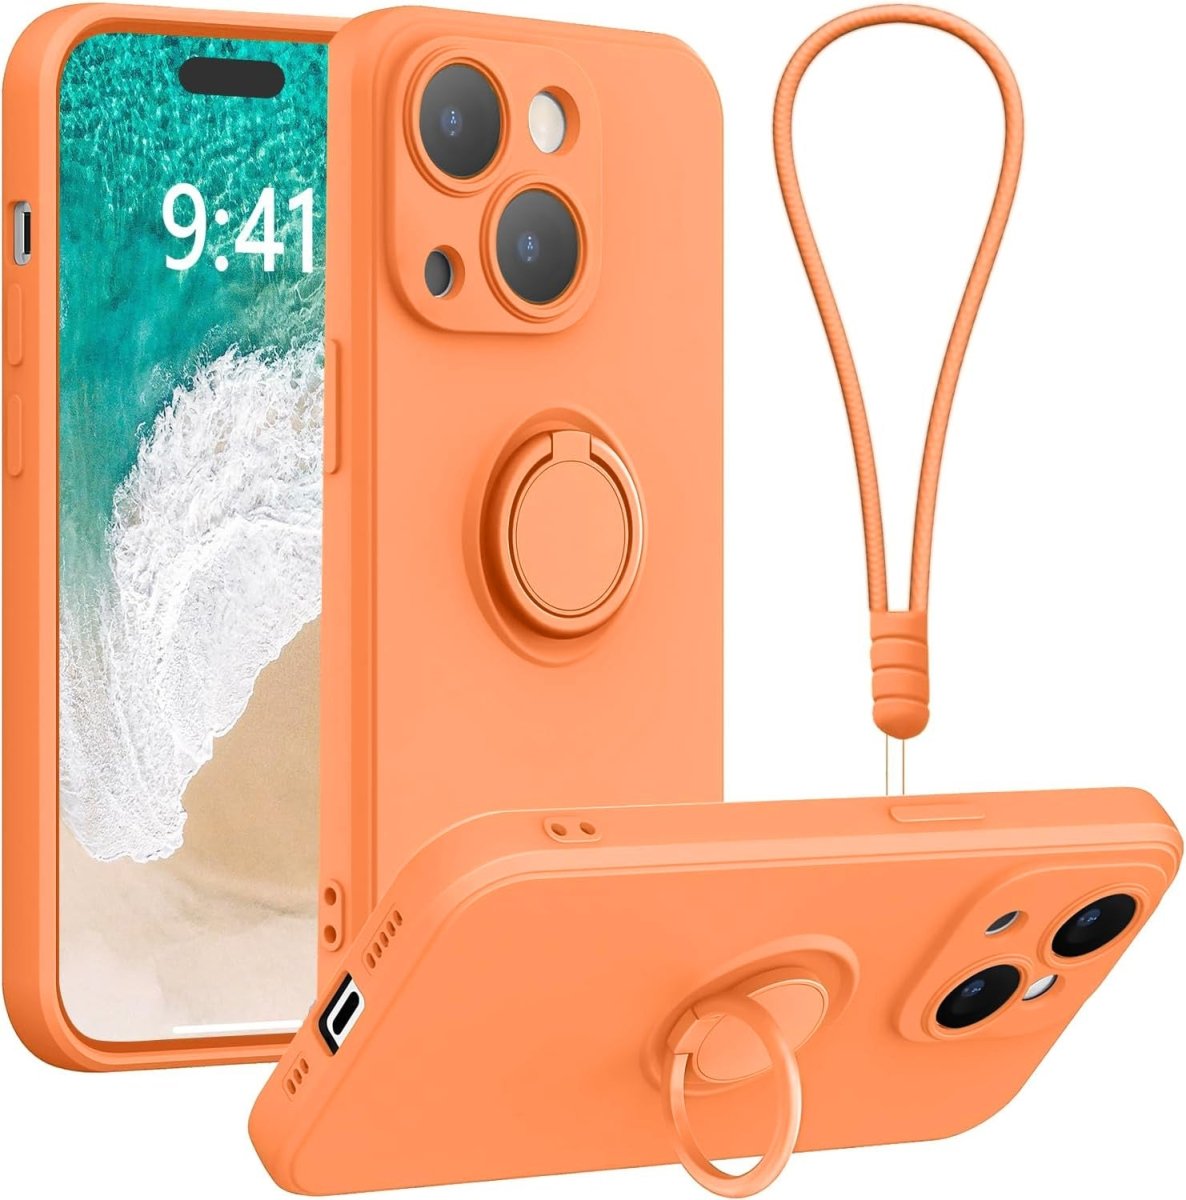 Papaya Shockproof Silicone Case For iPhone With Ring And Lanyard  Papaya iPhone 11 Accessories Gifts UK